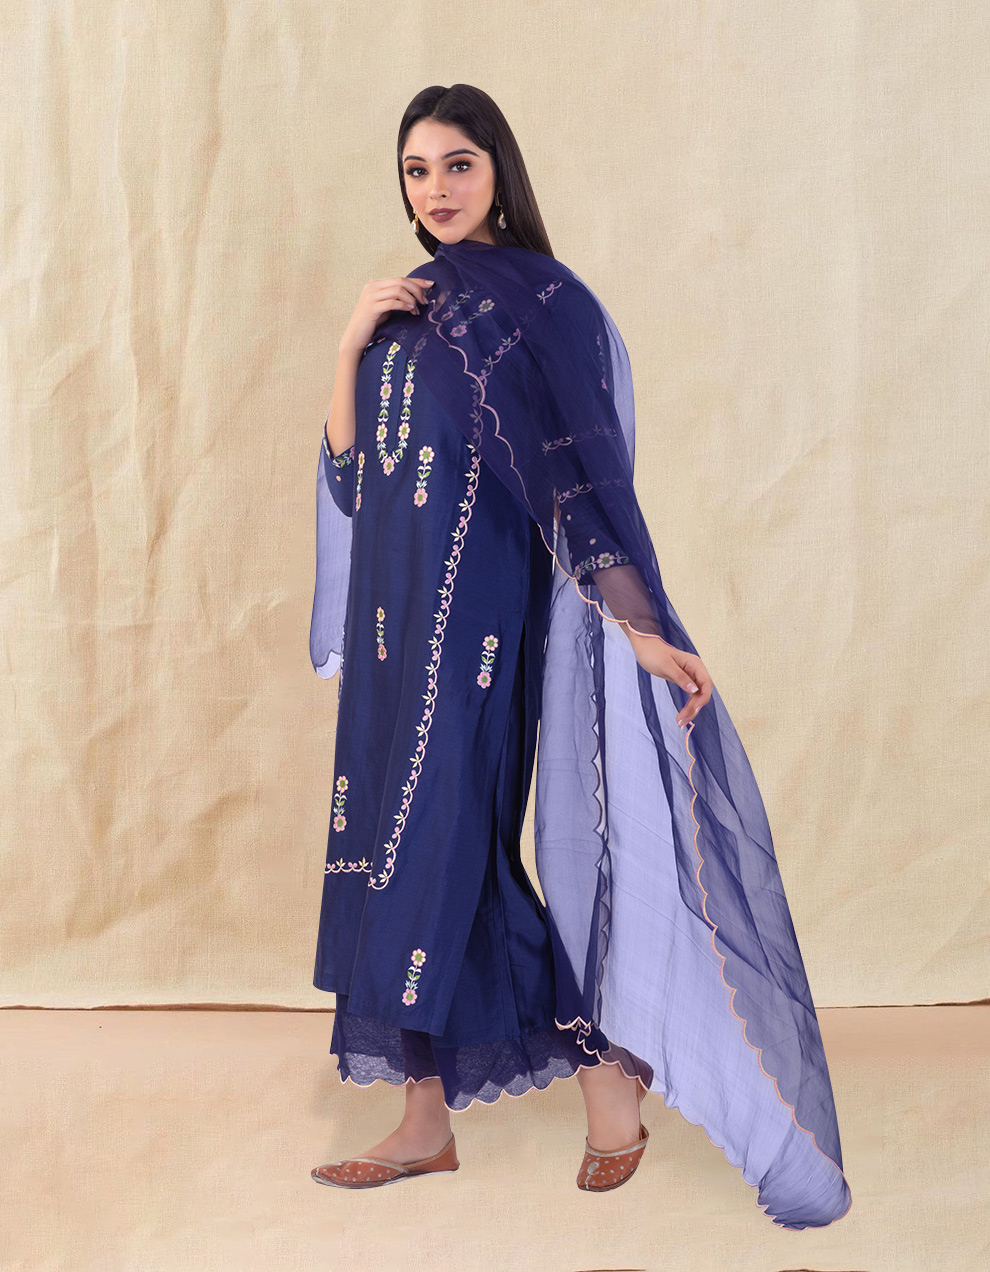 Blue-hand-embroidered-scalloped-organza-dupatta-designs-for-ladies-at-the-best-prices